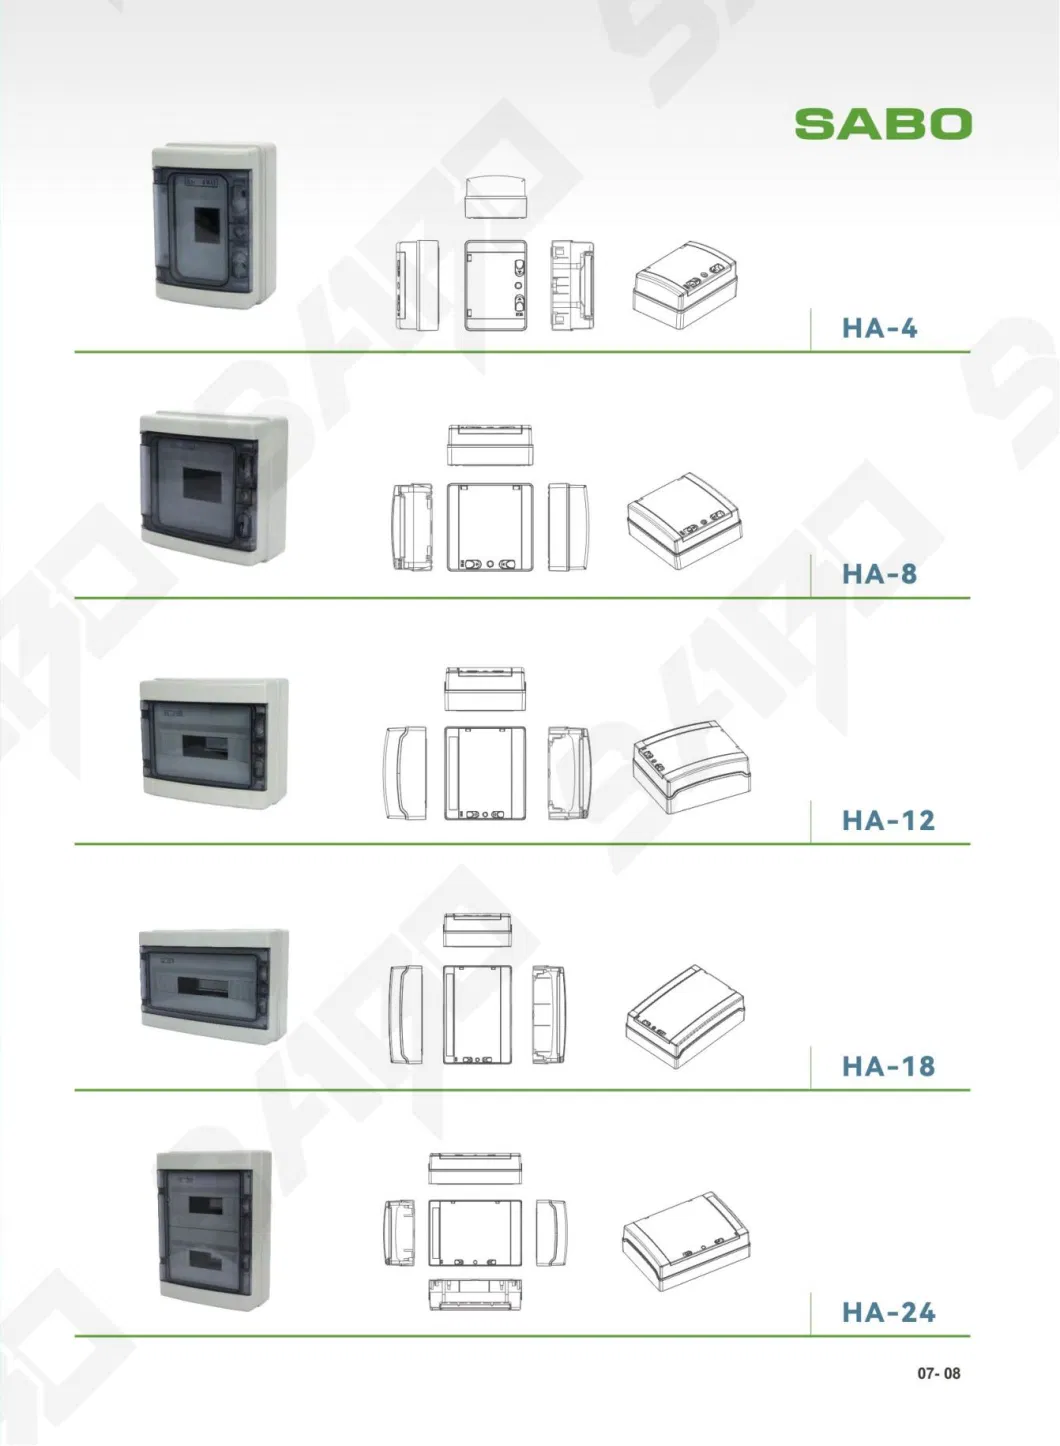 4 Way Ha Waterproof Surface Distribution Box Electrical Plastic Distribution Box dB Box Waterproof for Outdoor